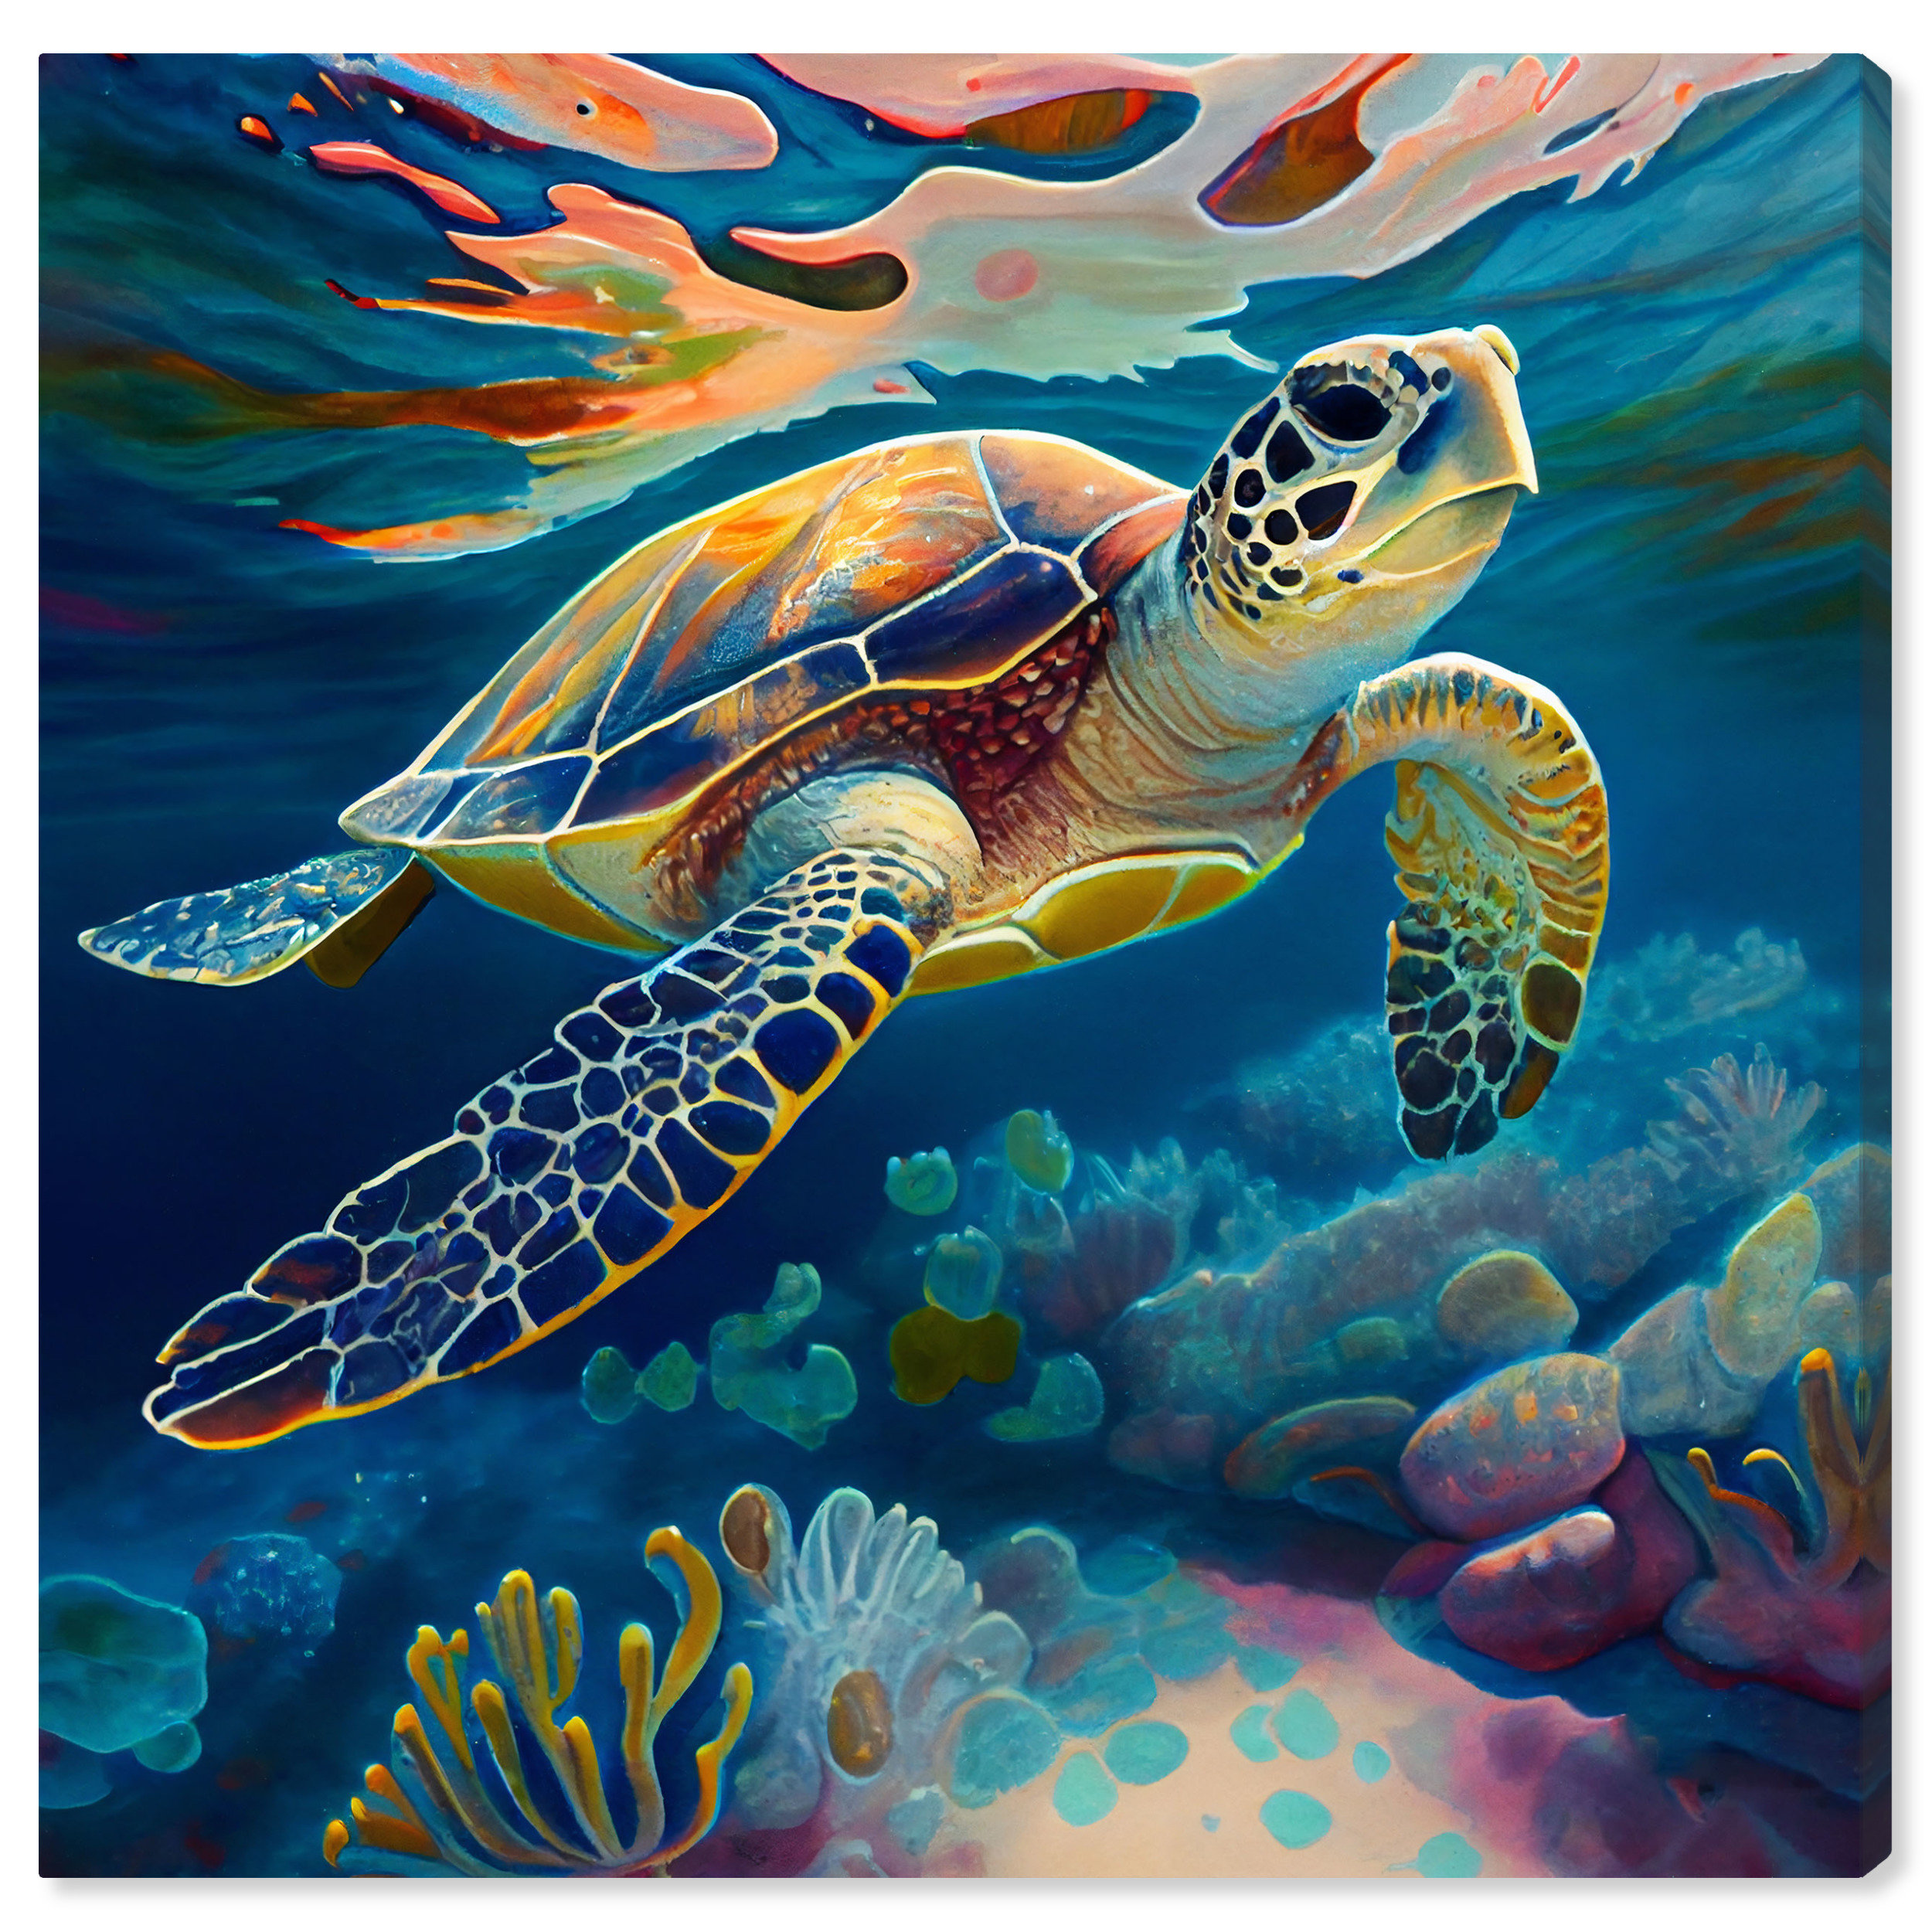 Bay Isle Home Sea Turtle I On Canvas by Oliver Gal Print & Reviews